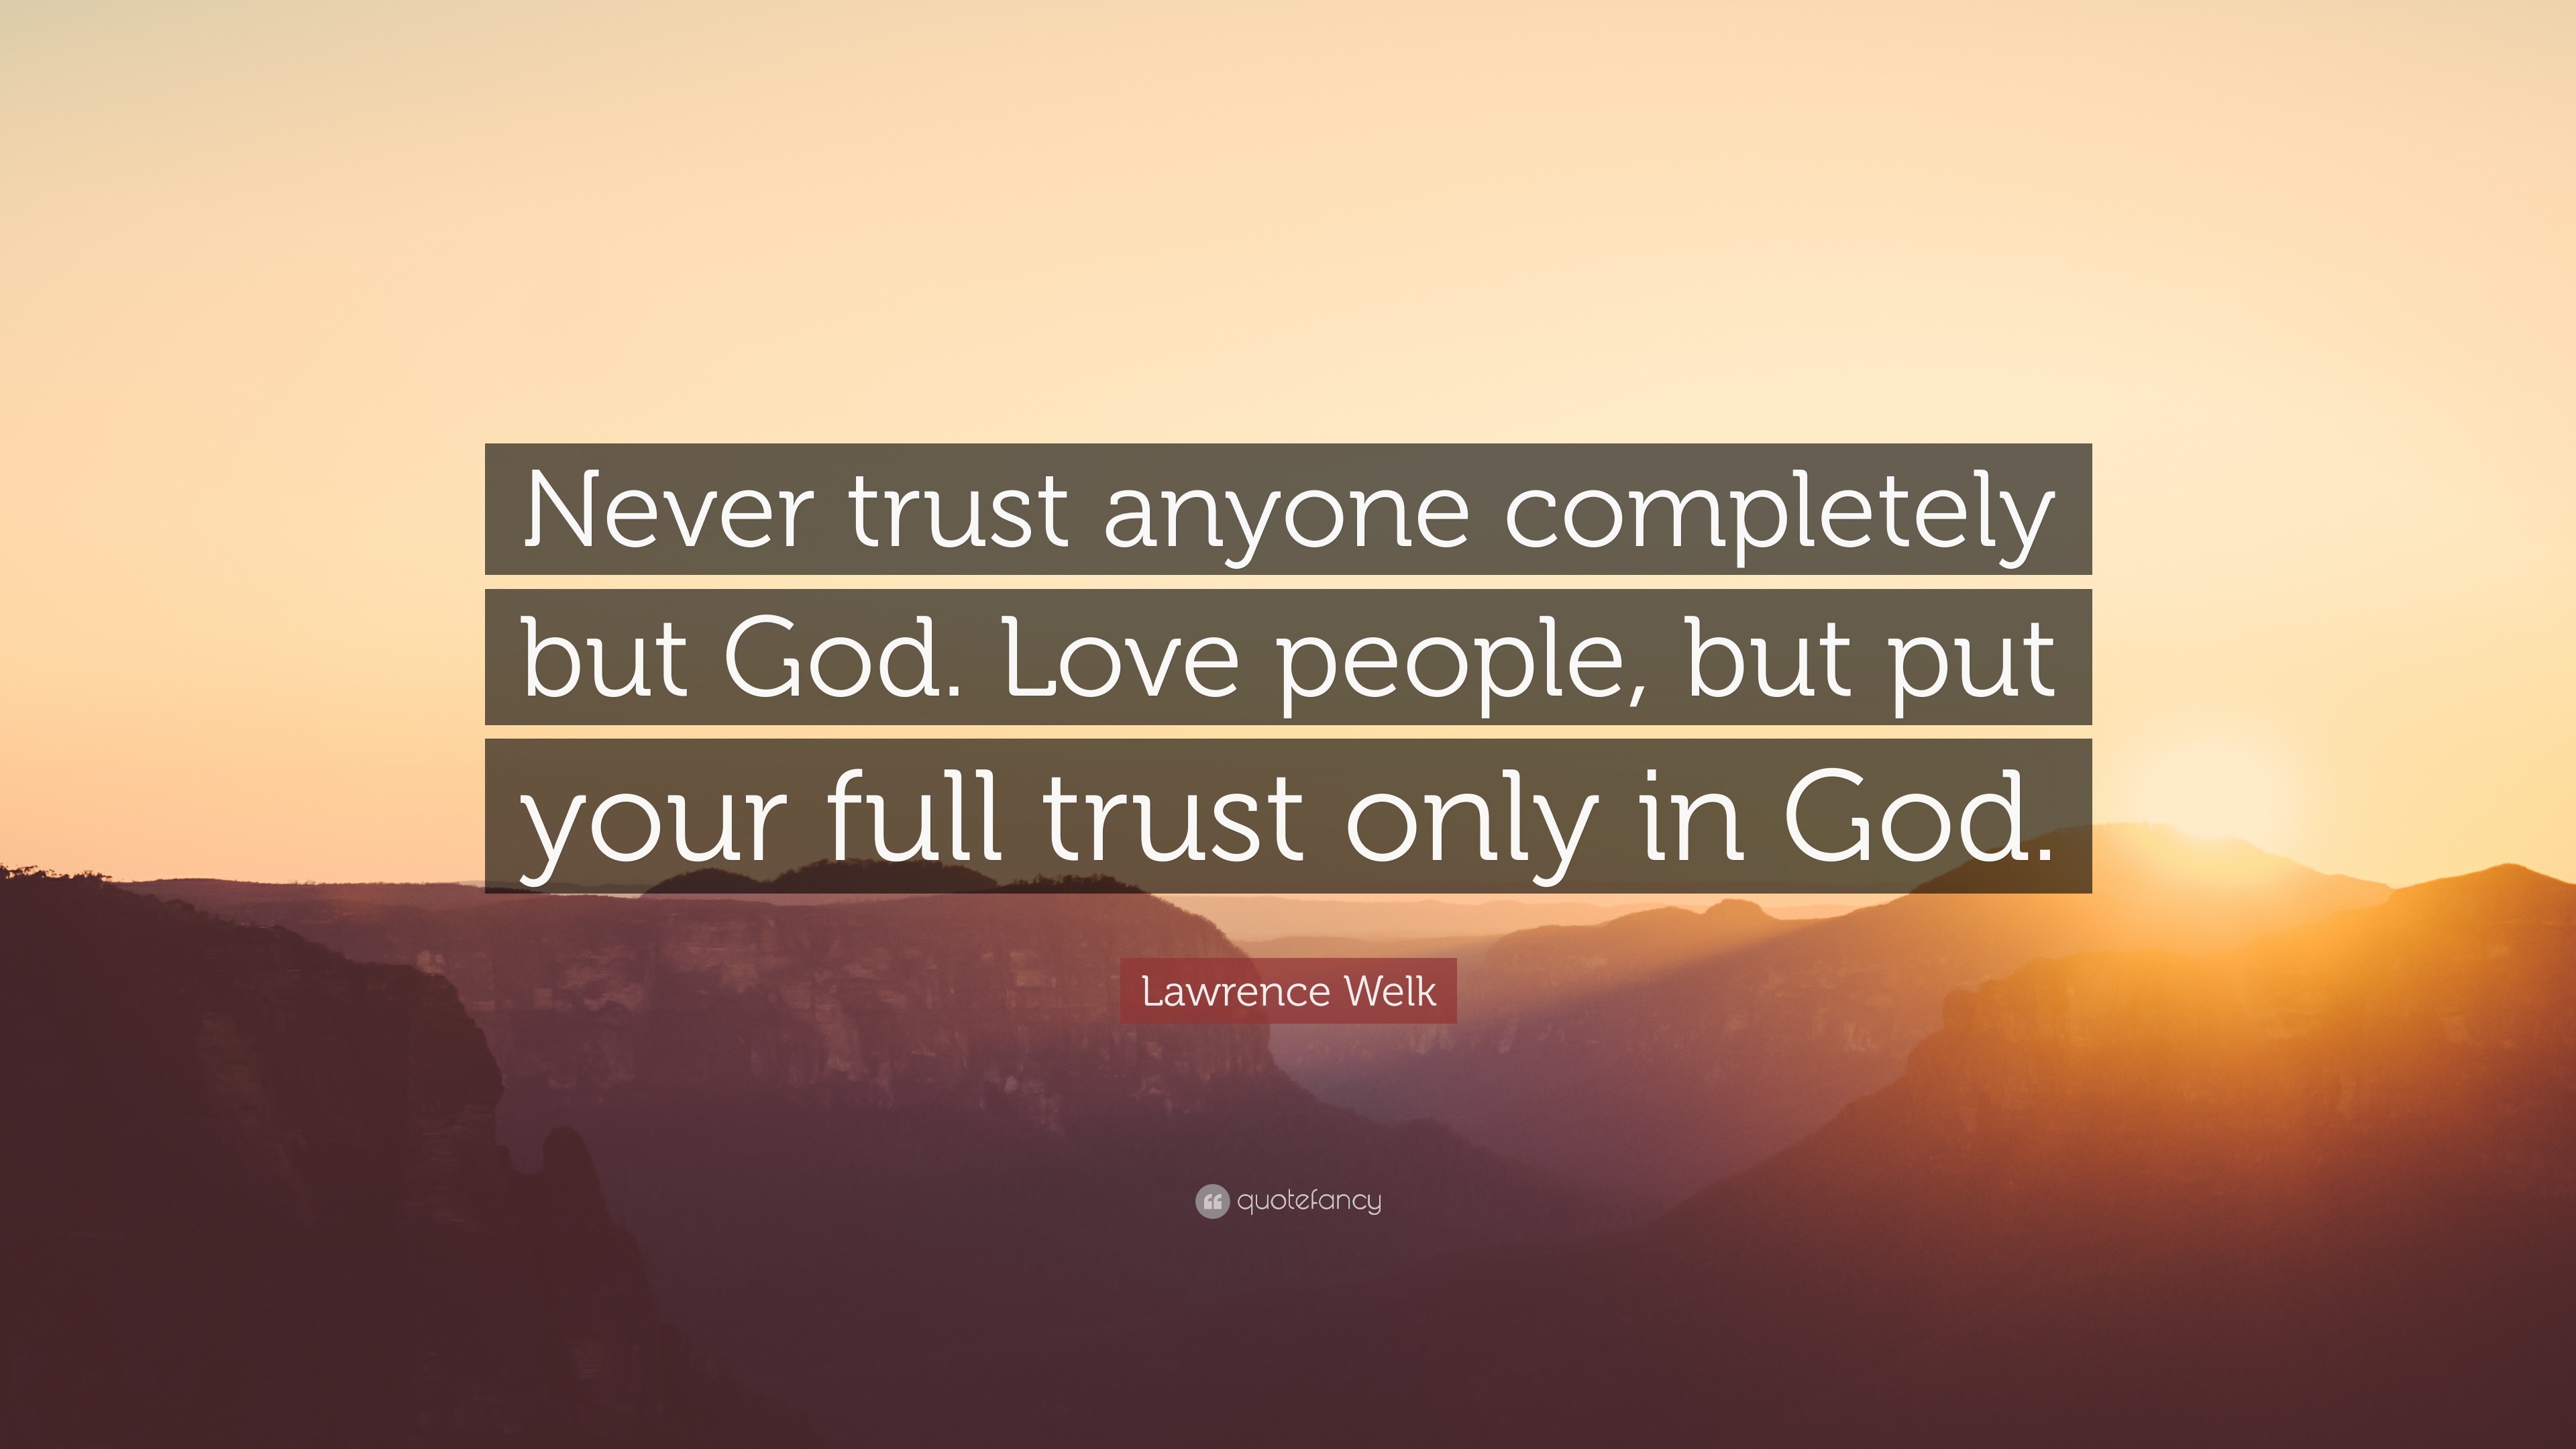 Lawrence Welk Quote “Never trust anyone pletely but God Love people but